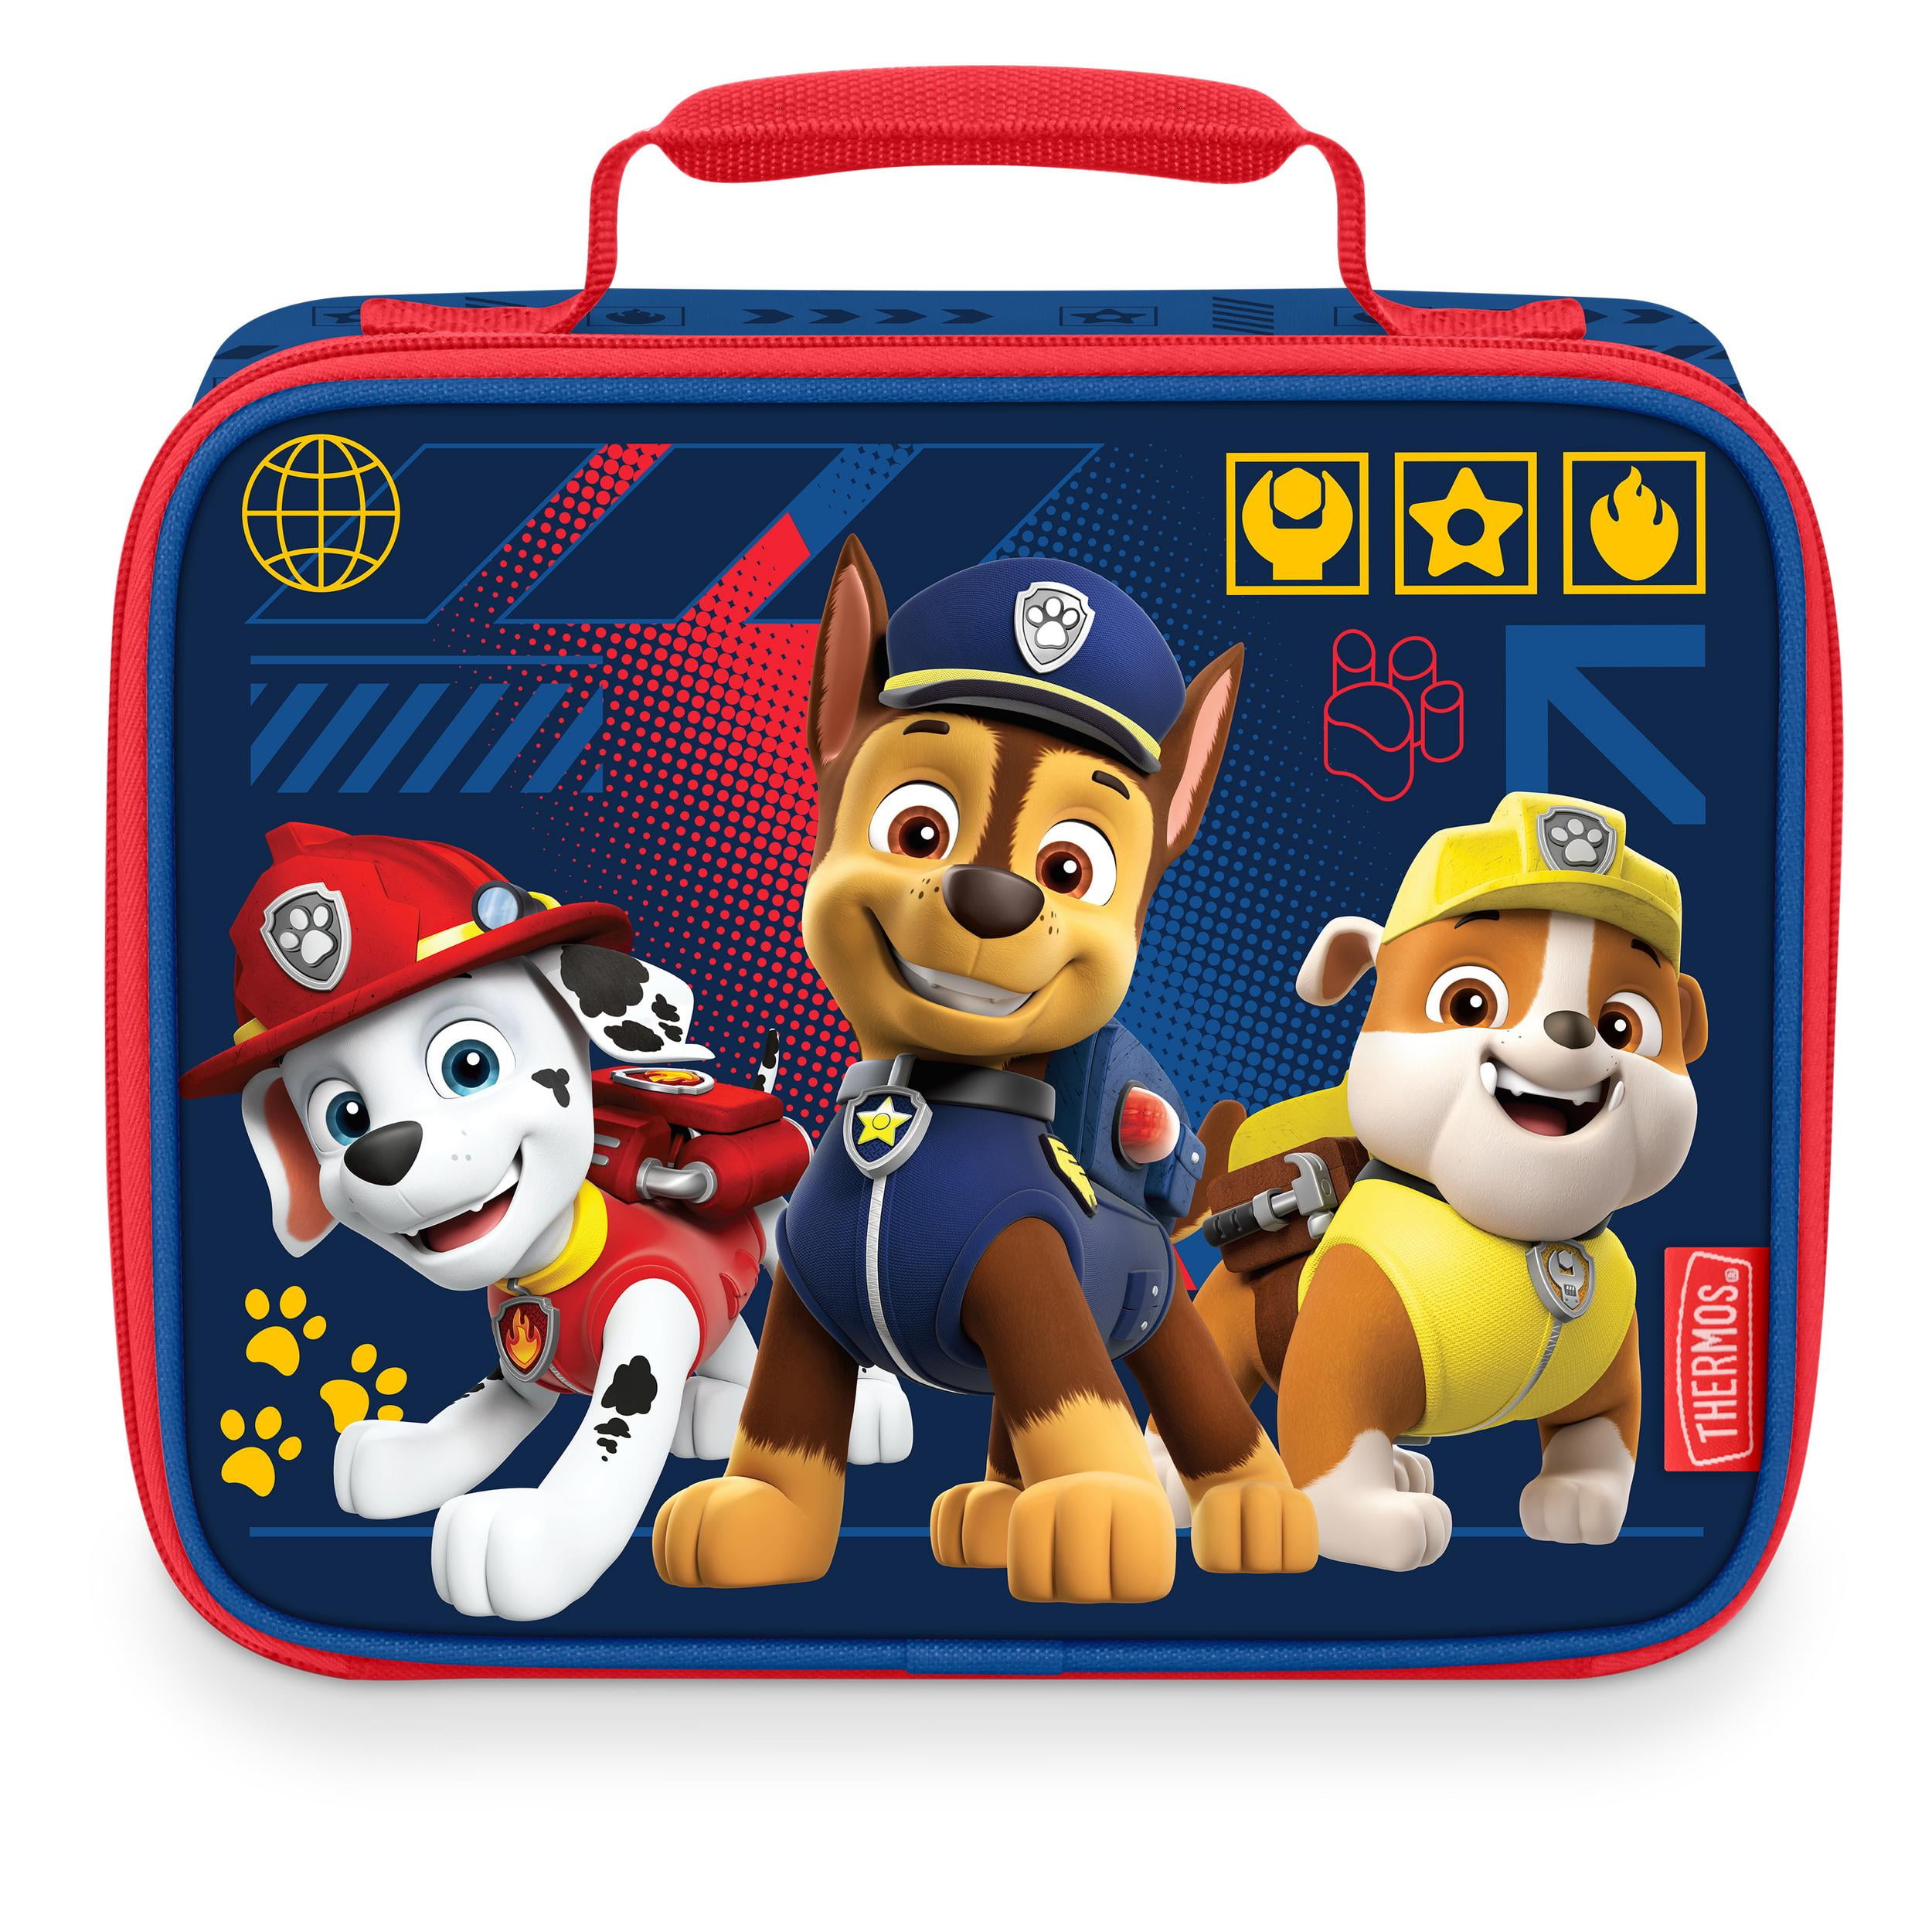 Thermos Paw Patrol Standard Lunch Kit, Lunch Bags